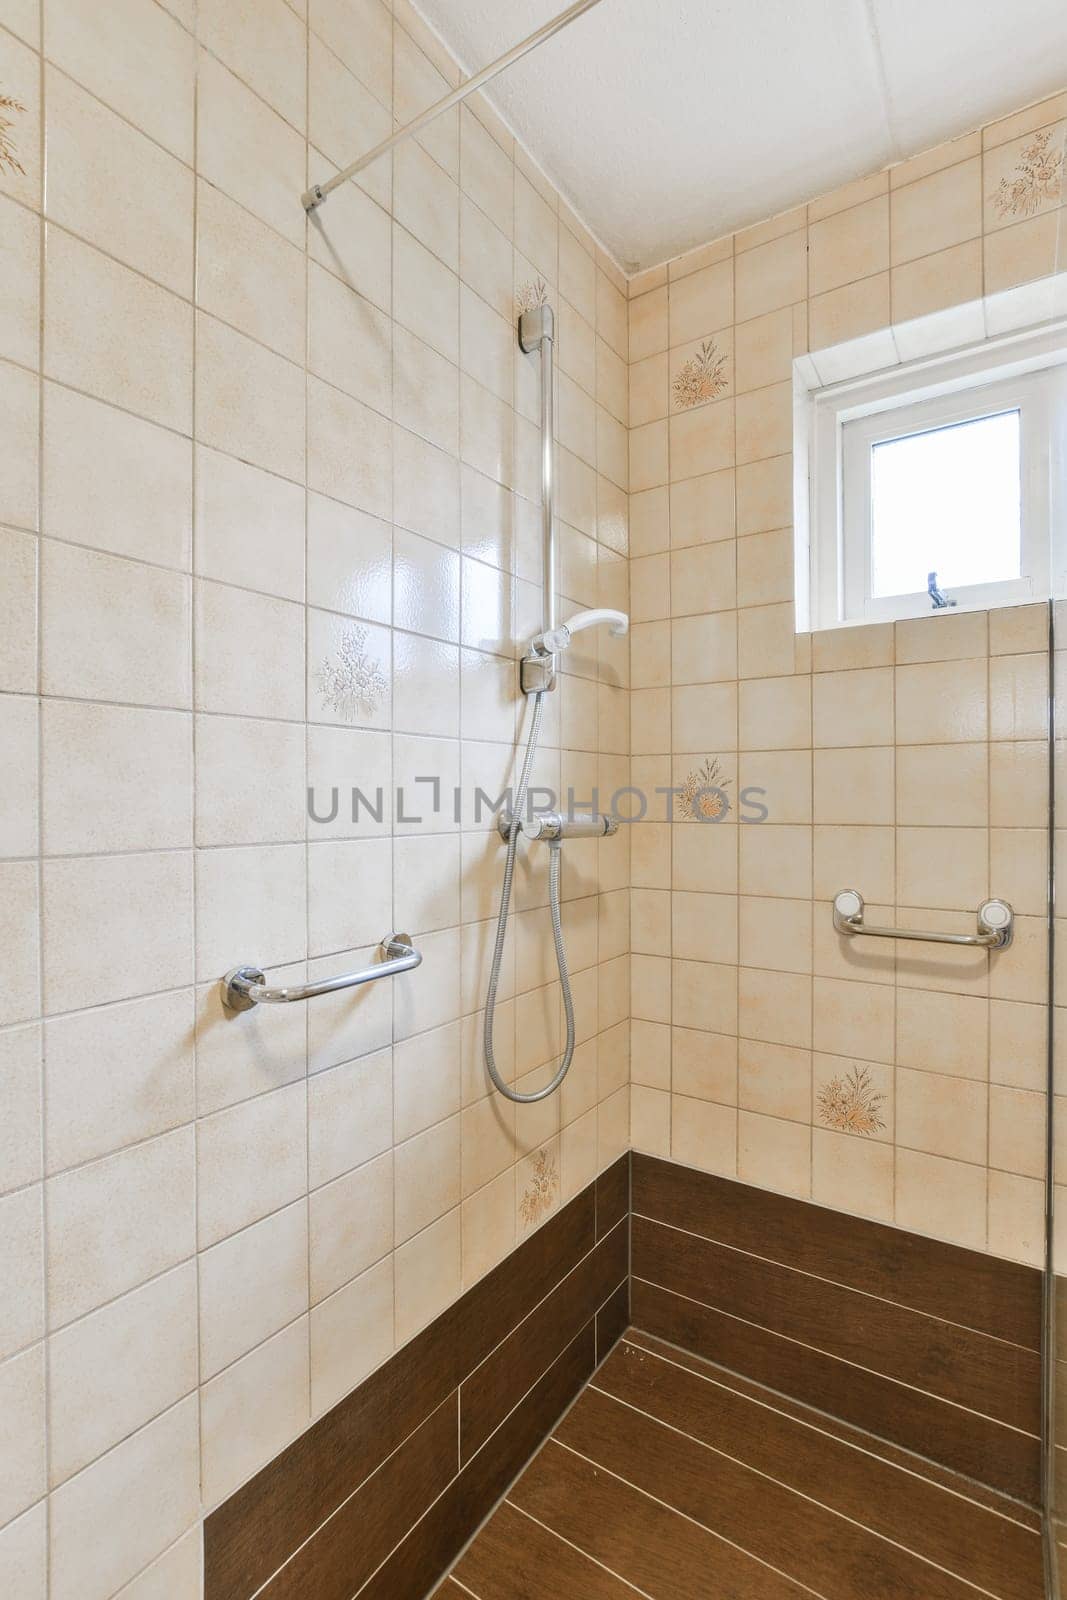 a bathroom with tile on the floor and shower head mounted to the wall, in front of a large window